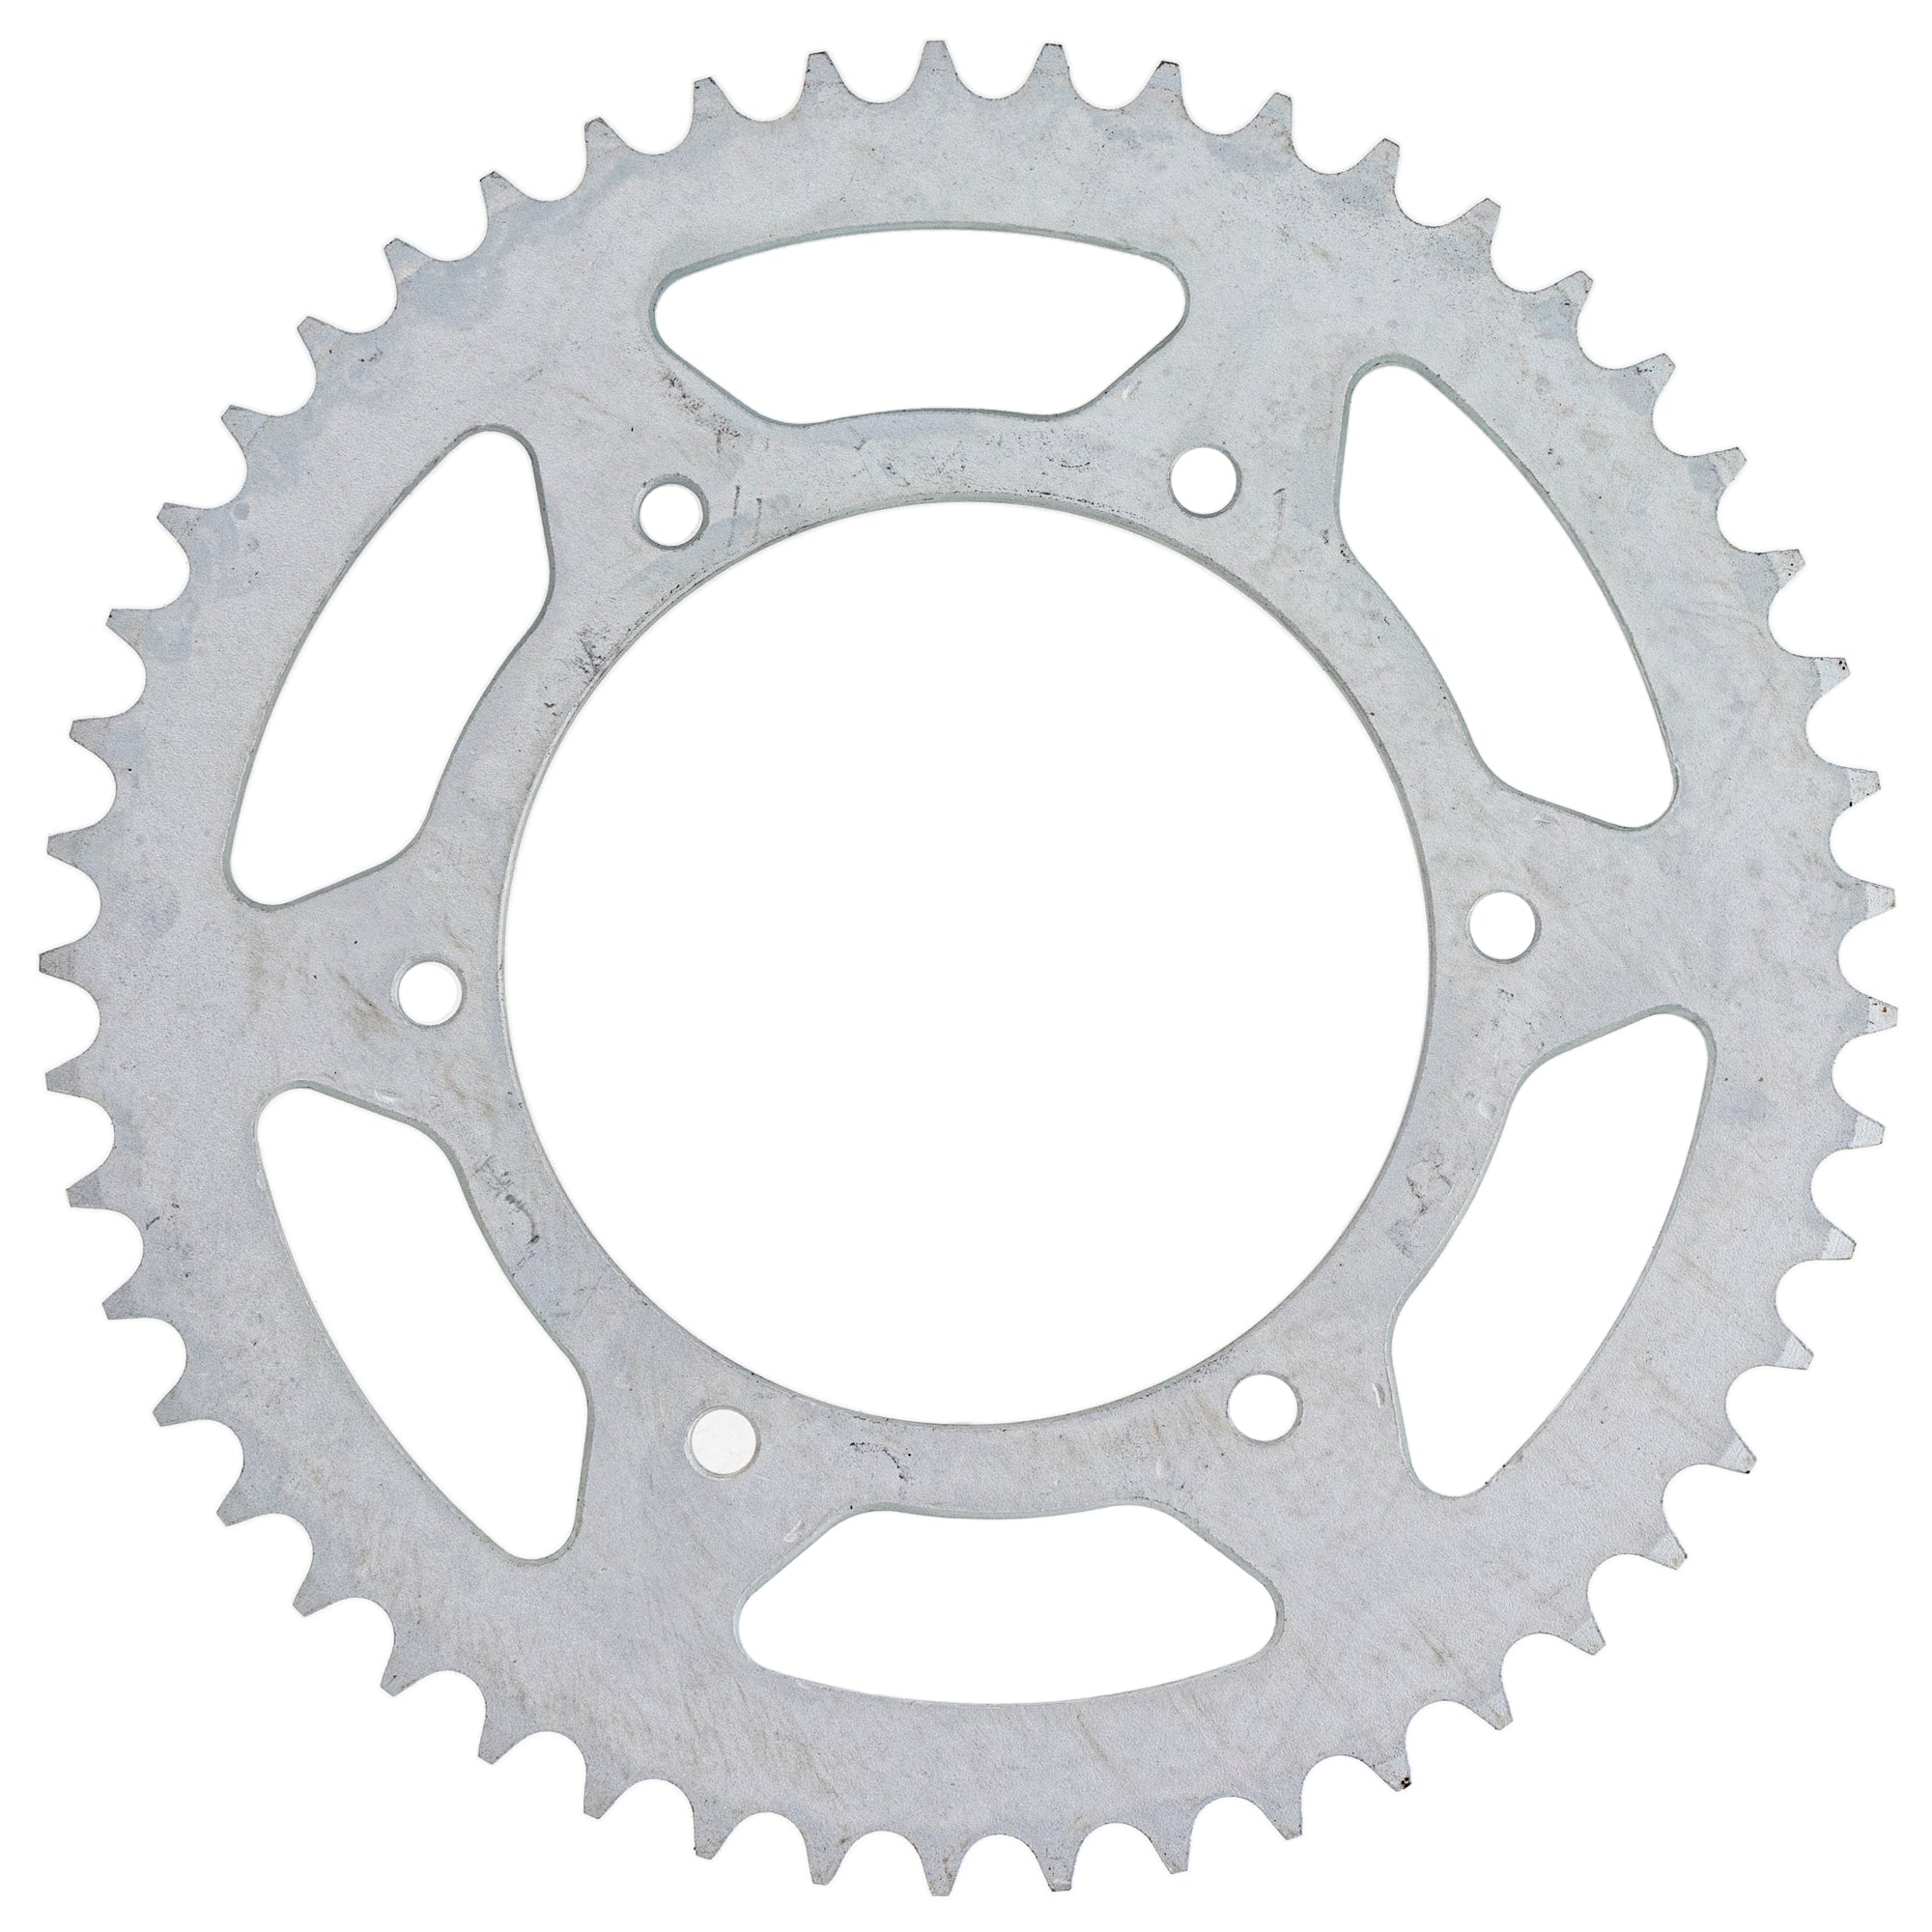 520 Front 14T Rear 49T Drive Sprocket Kit for Suzuki RM250